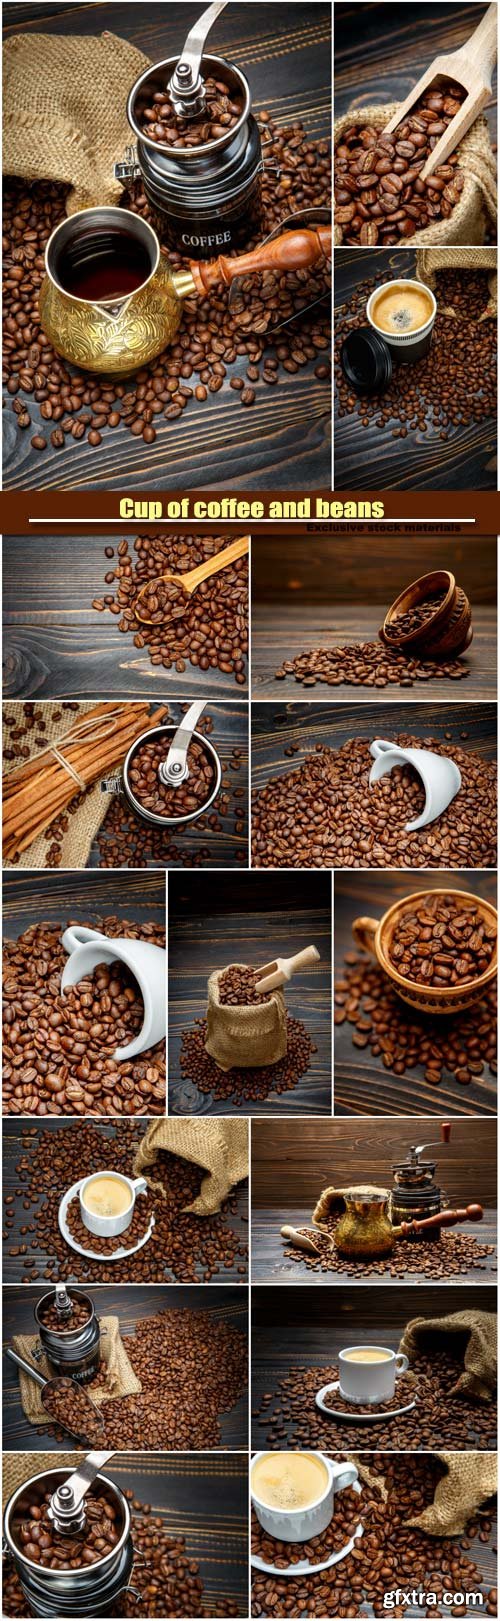 Cup of coffee and beans on wooden background